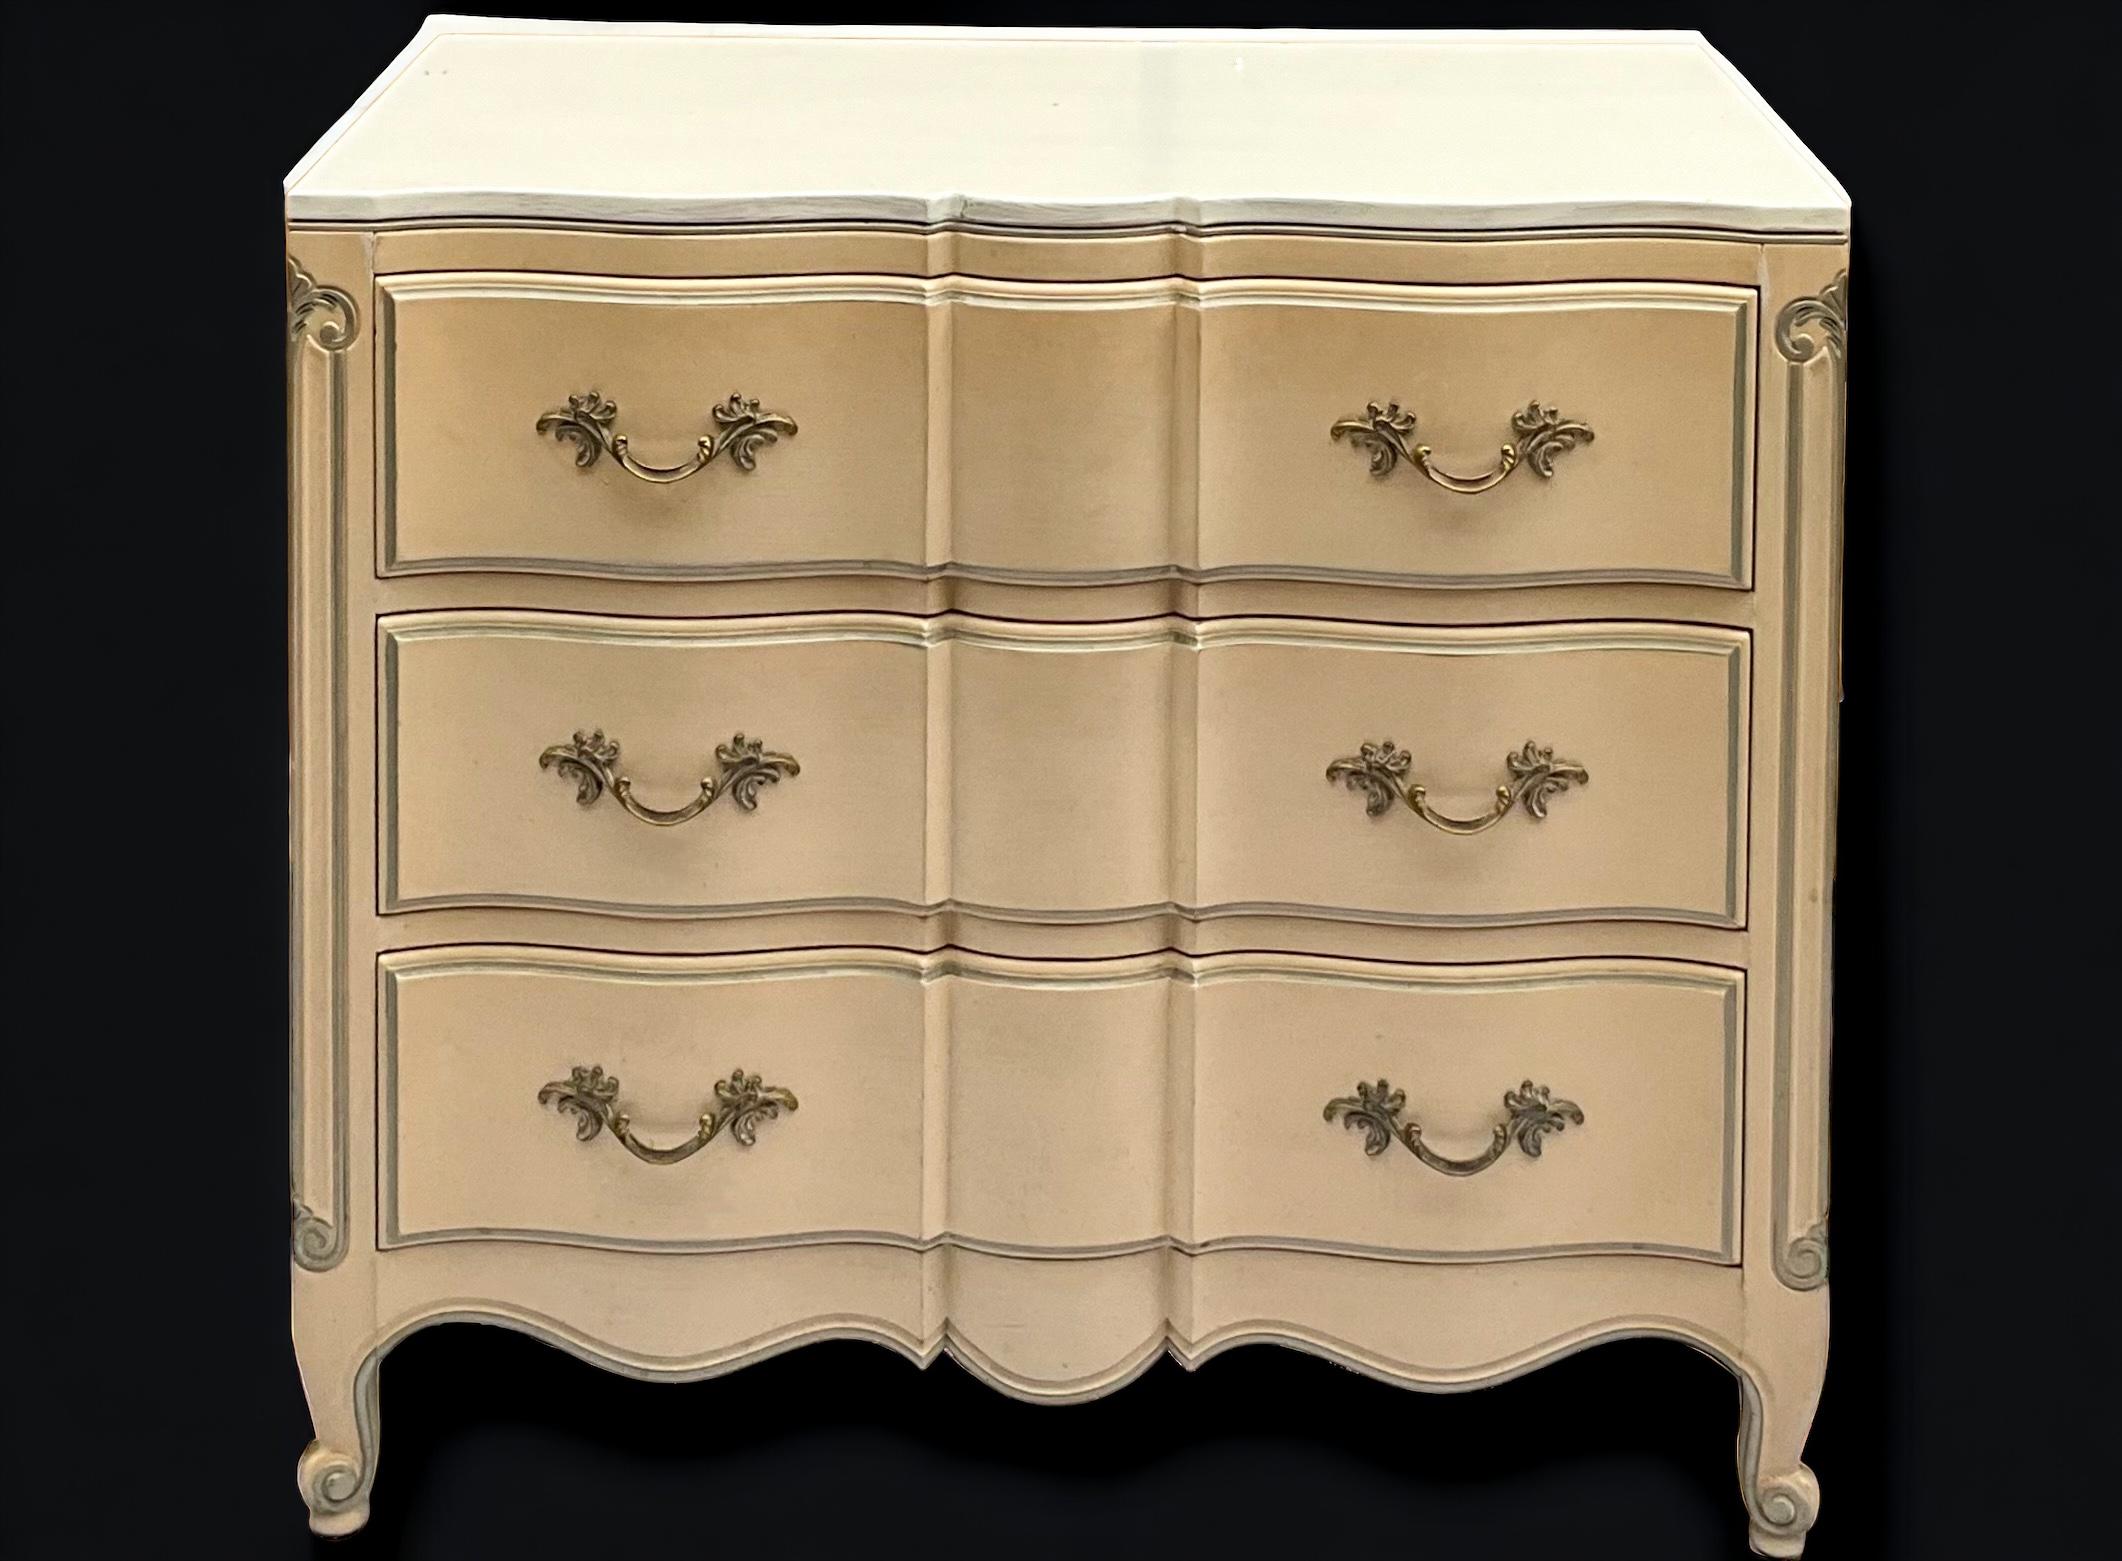 This is a timeless pair of French Louis XIV style chests with a custom finish by Dixie Furniture. The body is a blush with gray trim and ivory tops. They are marked with dovetail construction. They are in very good condition.